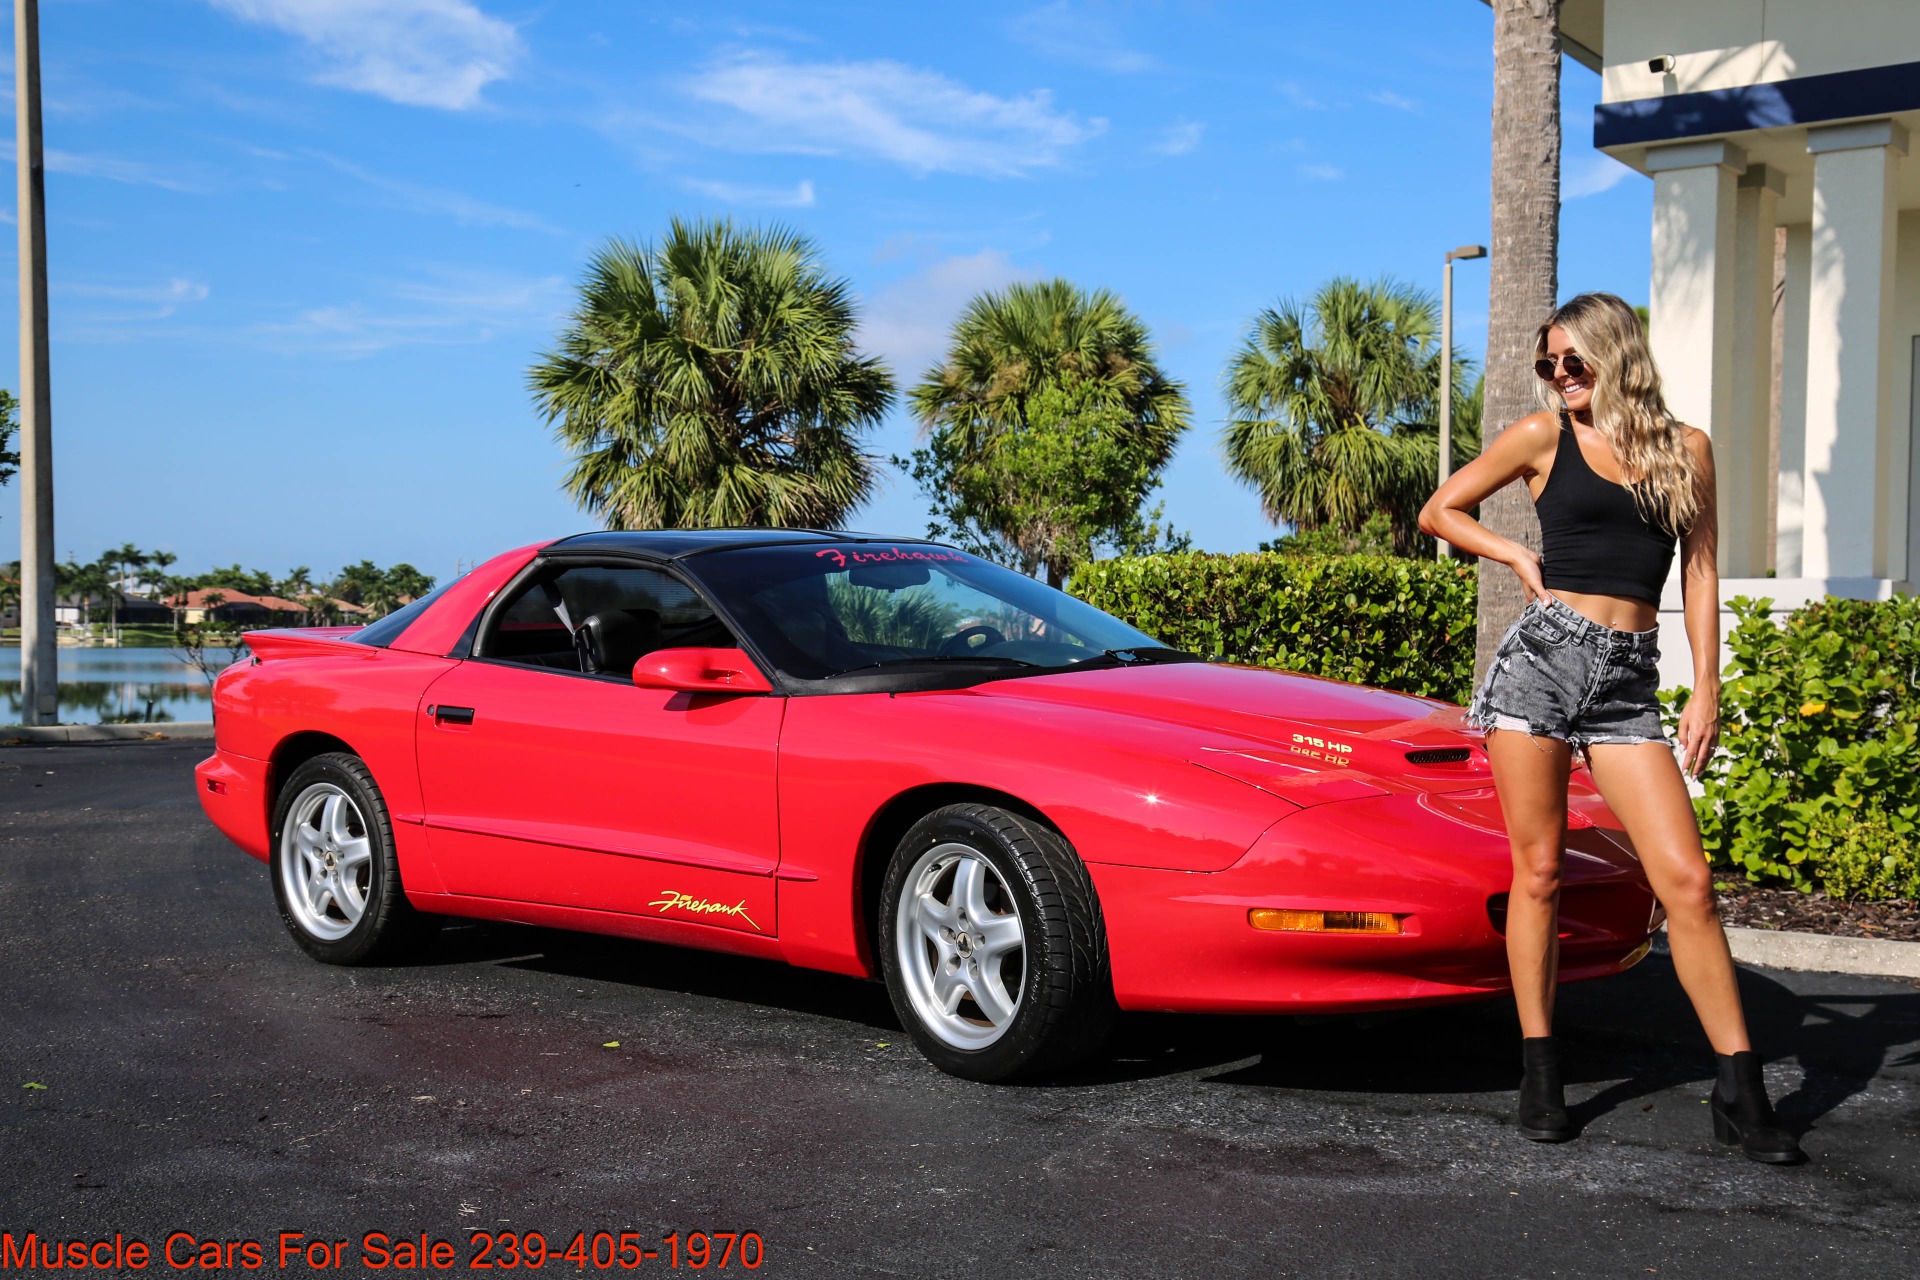 Used 1995 Pontiac Firebird FireHawk Fire Hawk for sale $21,000 at Muscle Cars for Sale Inc. in Fort Myers FL 33912 1